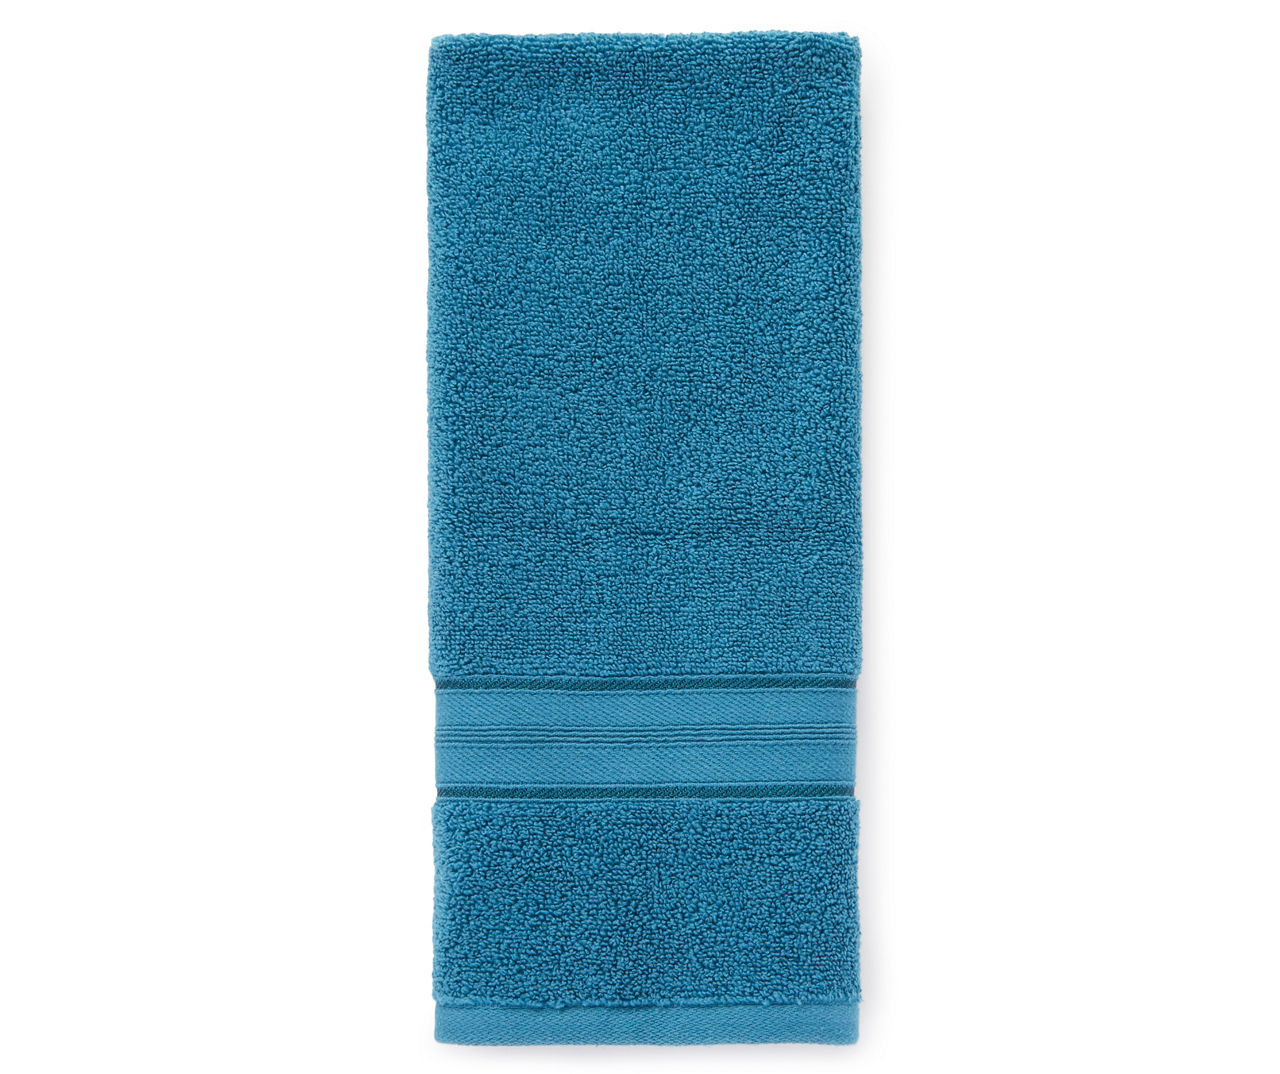 LC HAND TOWEL BLUE CORAL